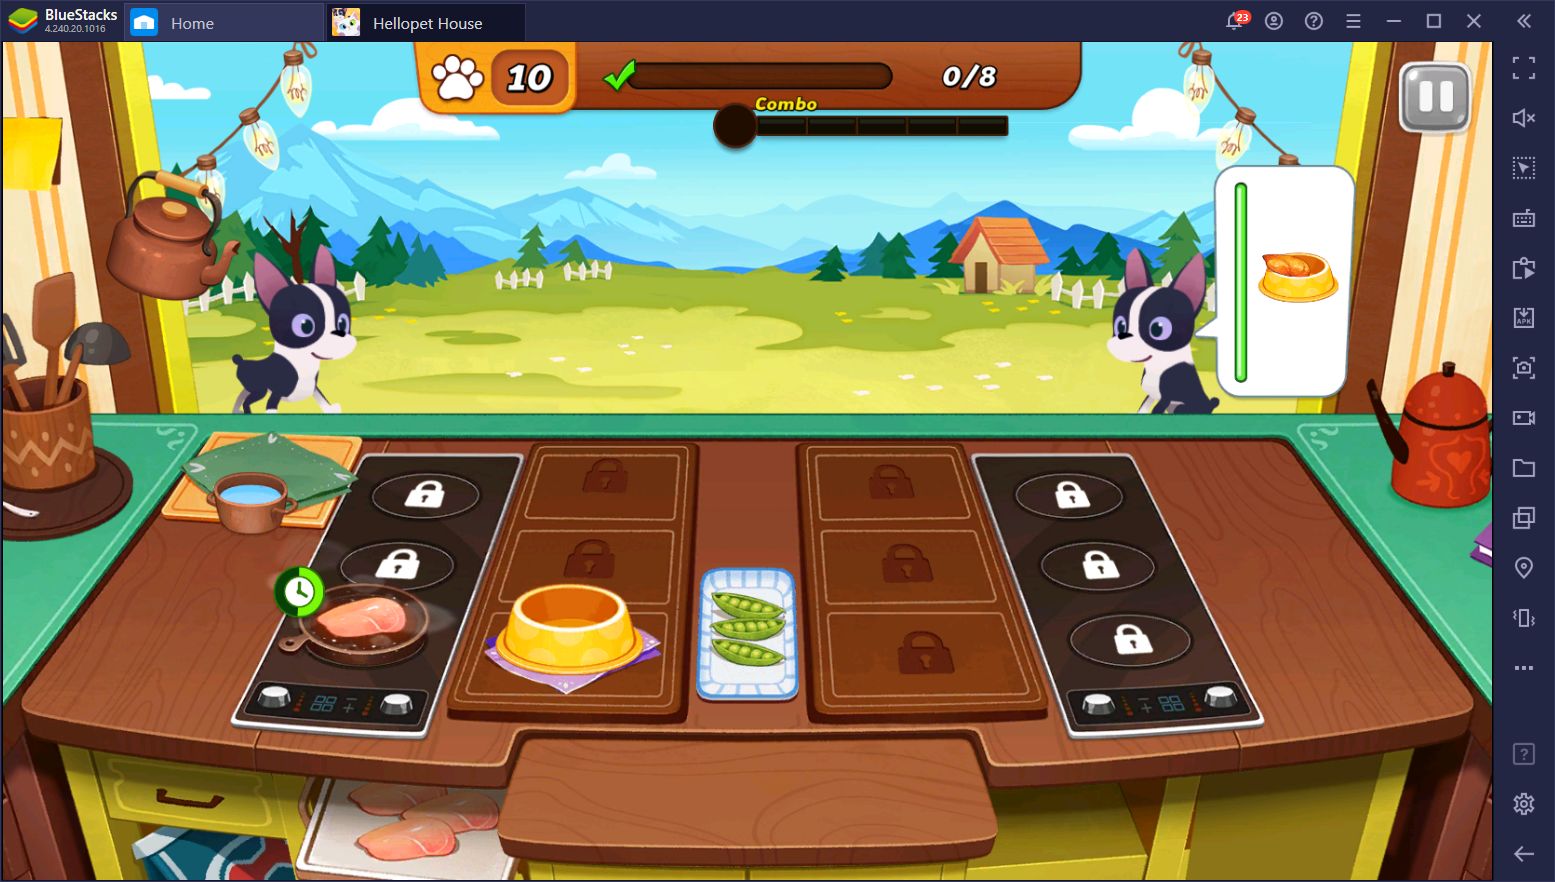 Hellopet House - How to Play This Casual, Lighthearted Mobile Game on PC With BlueStacks